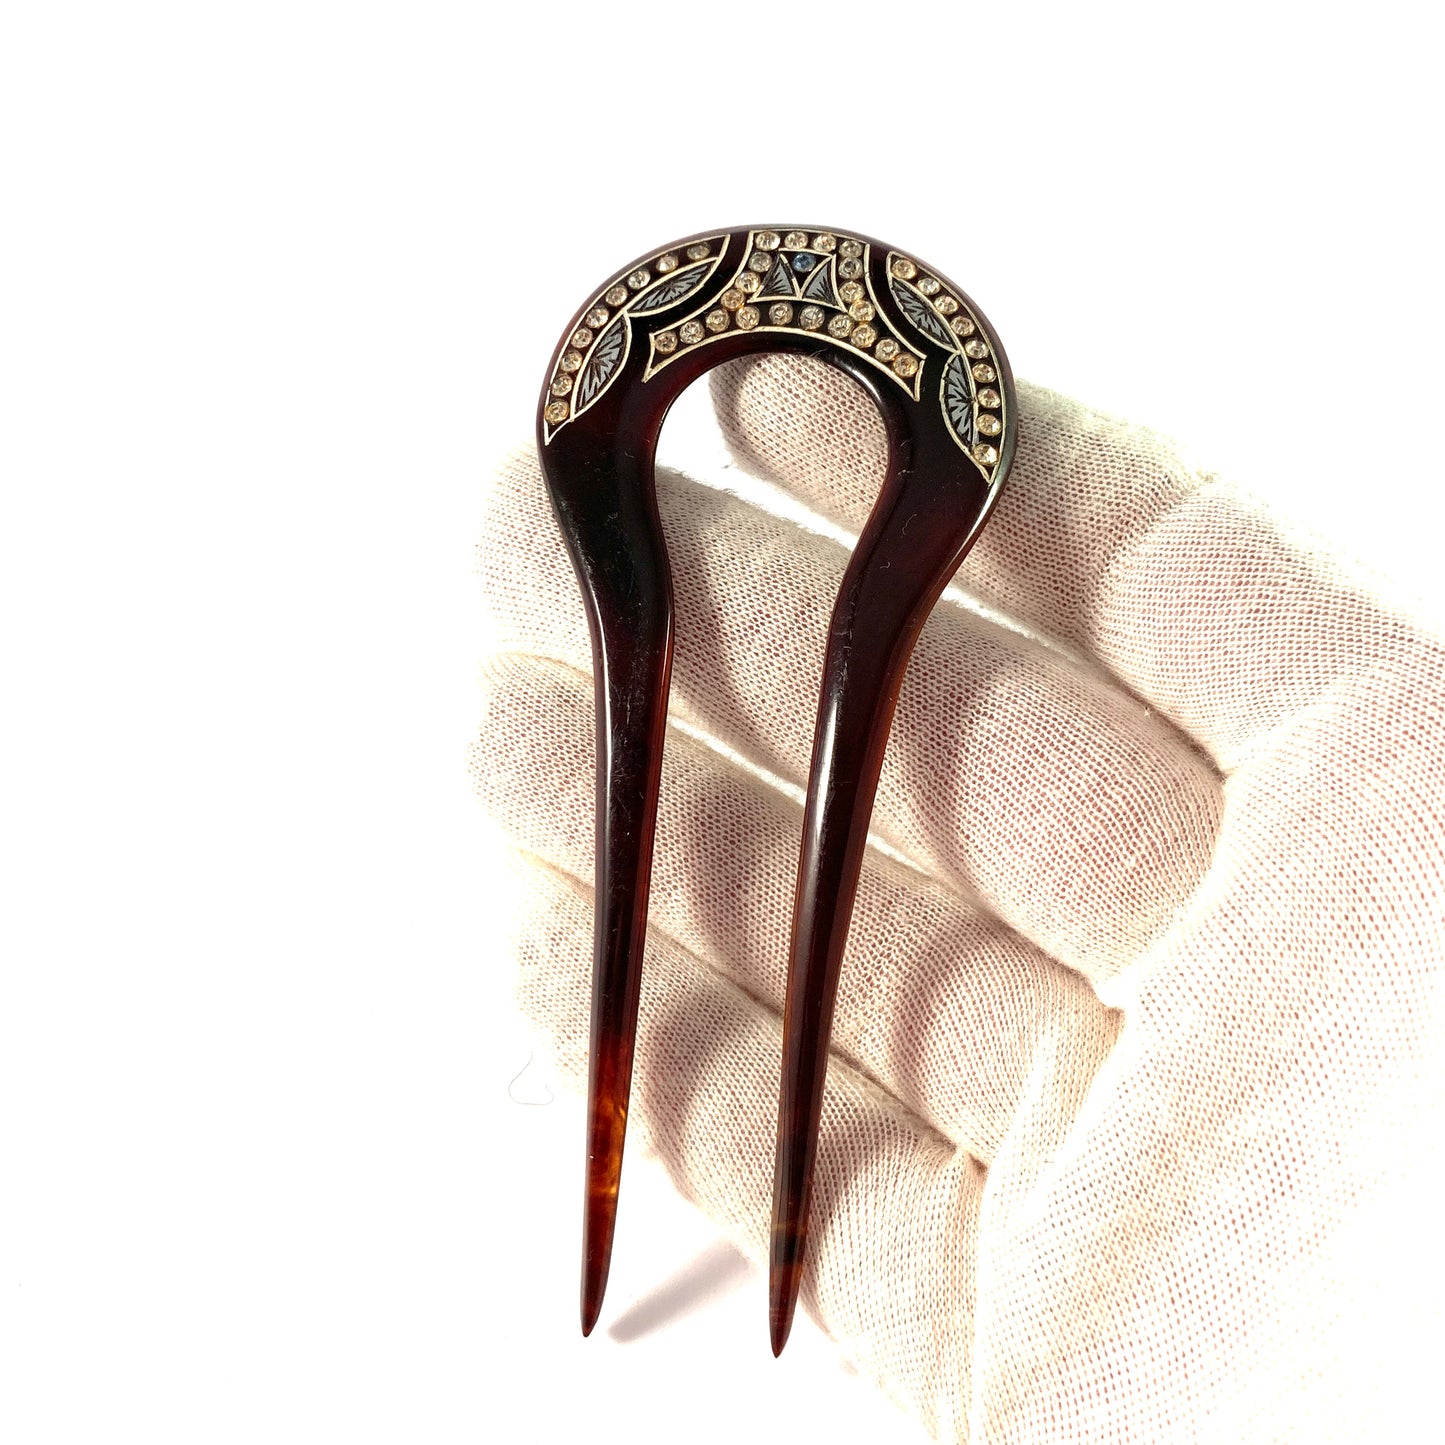 Antique c year 1900 Jugendstil Celluloid Rhinestones Hair Comb. Probably Germany.